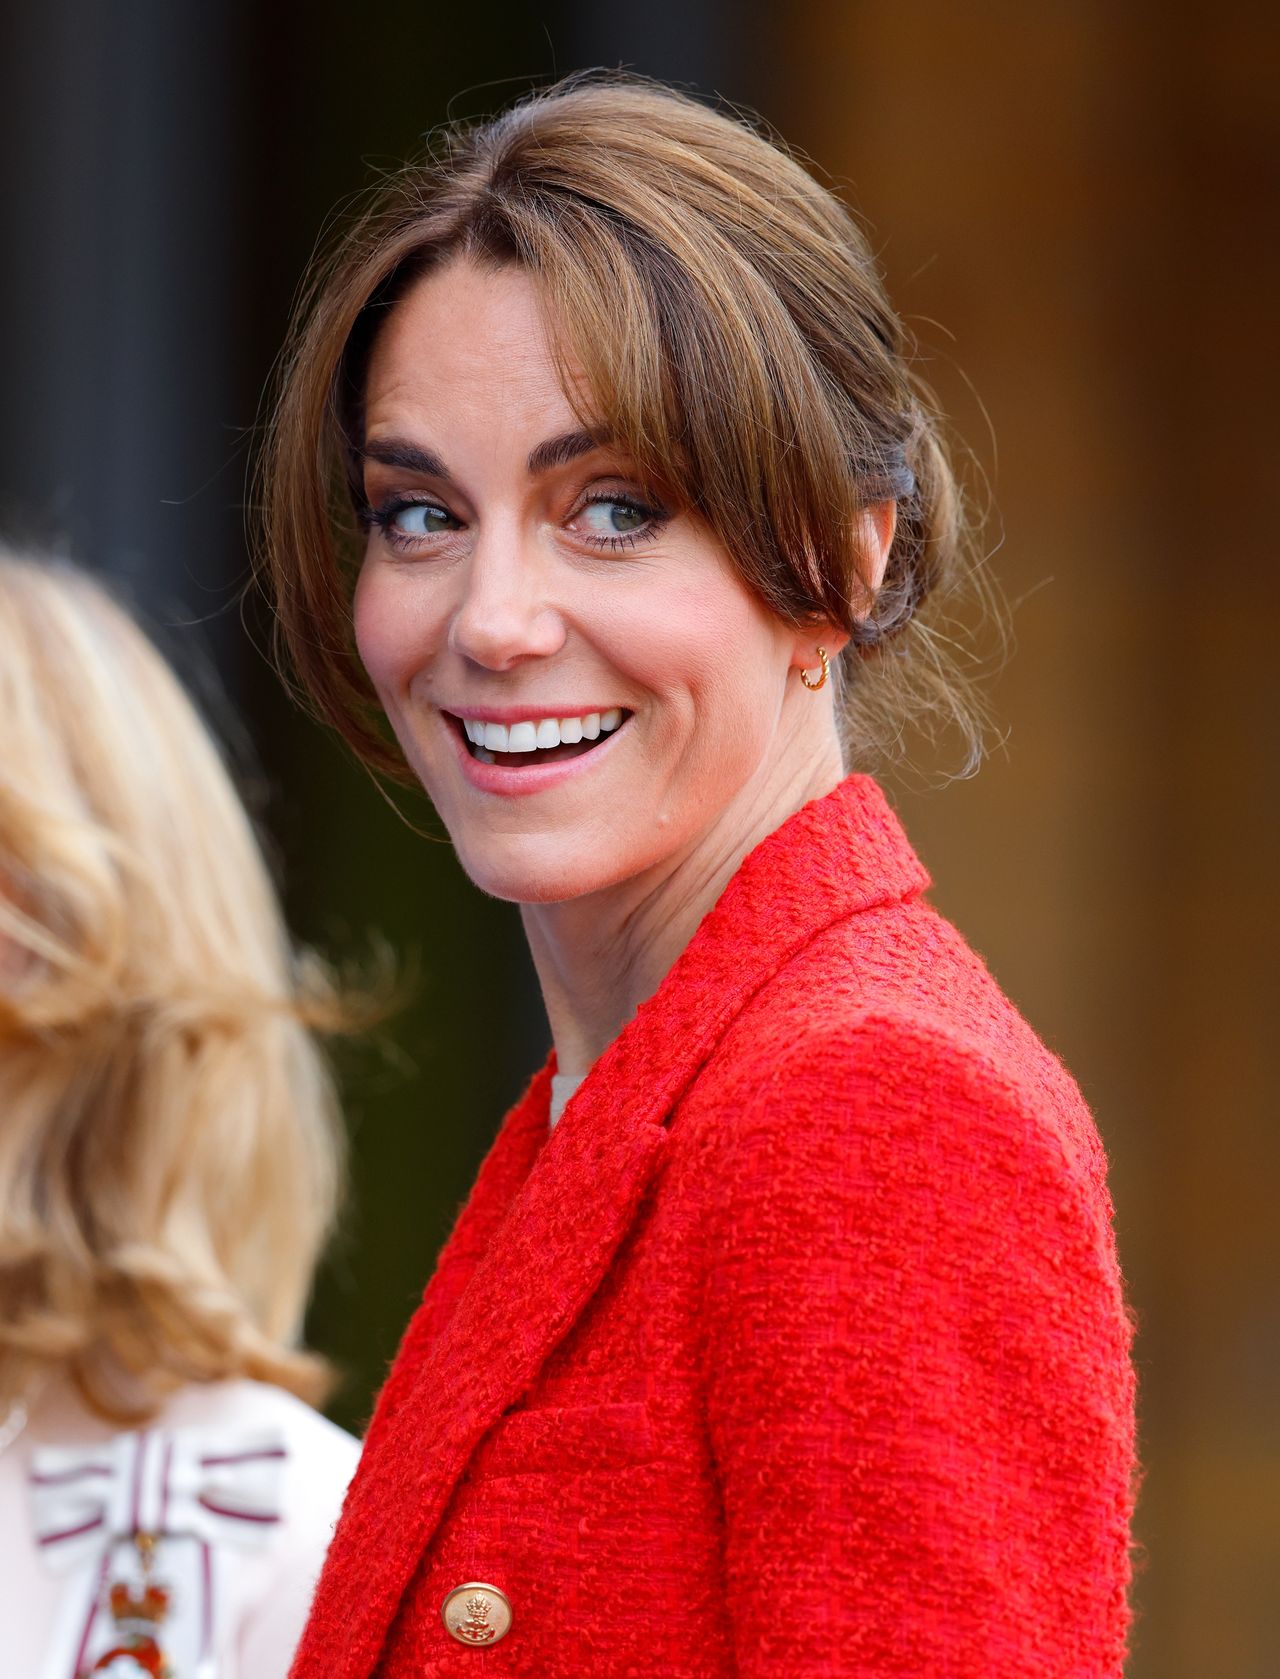 Kate Middleton showed up with a new hairstyle. People are divided: 